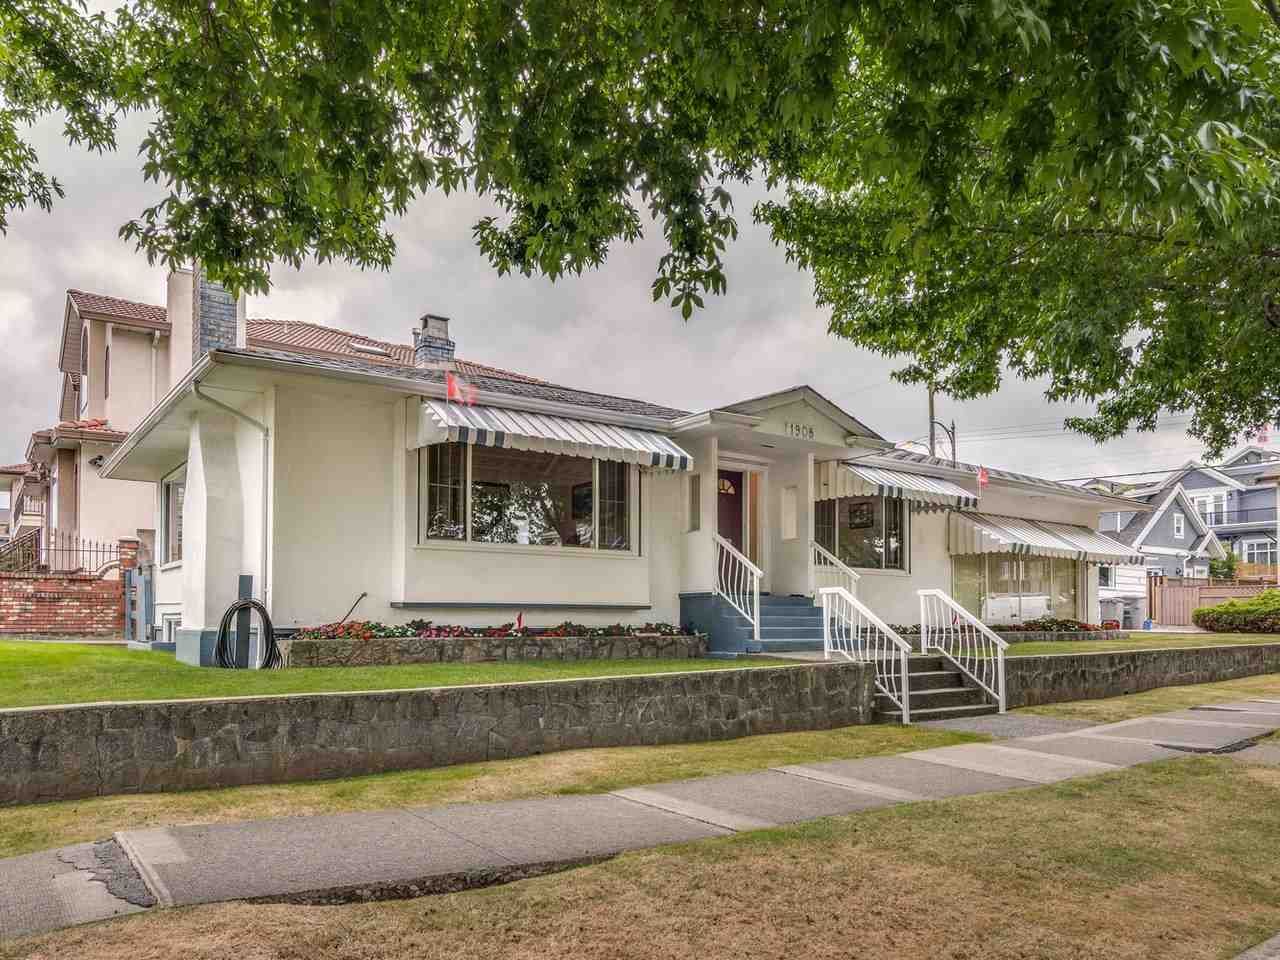 Main Photo: 1908 PENTICTON Street in Vancouver: Renfrew VE House for sale (Vancouver East)  : MLS®# R2493342